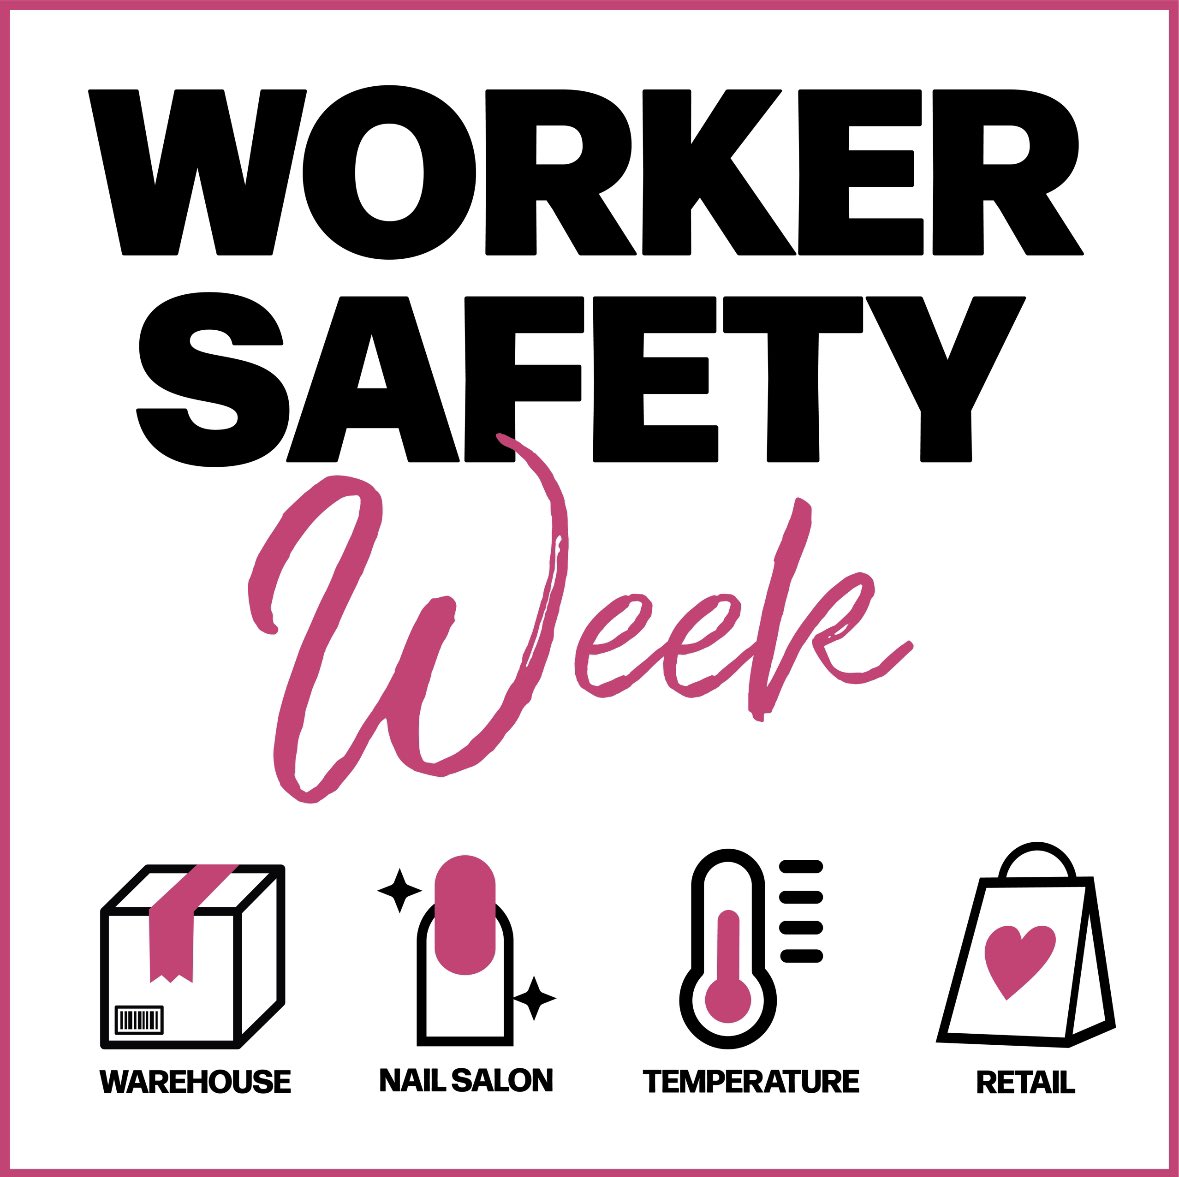 ⚠️Workers across industries are joining together to demand safer working conditions across NY⚠️ This #WorkerSafetyWeek we’re fighting for 4 bills 1. Nail Salon Minimum Standards Council Act 2. Retail Worker Safety Act  3. T.E.M.P. Bill  4. Warehouse Worker Injury Reduction Act